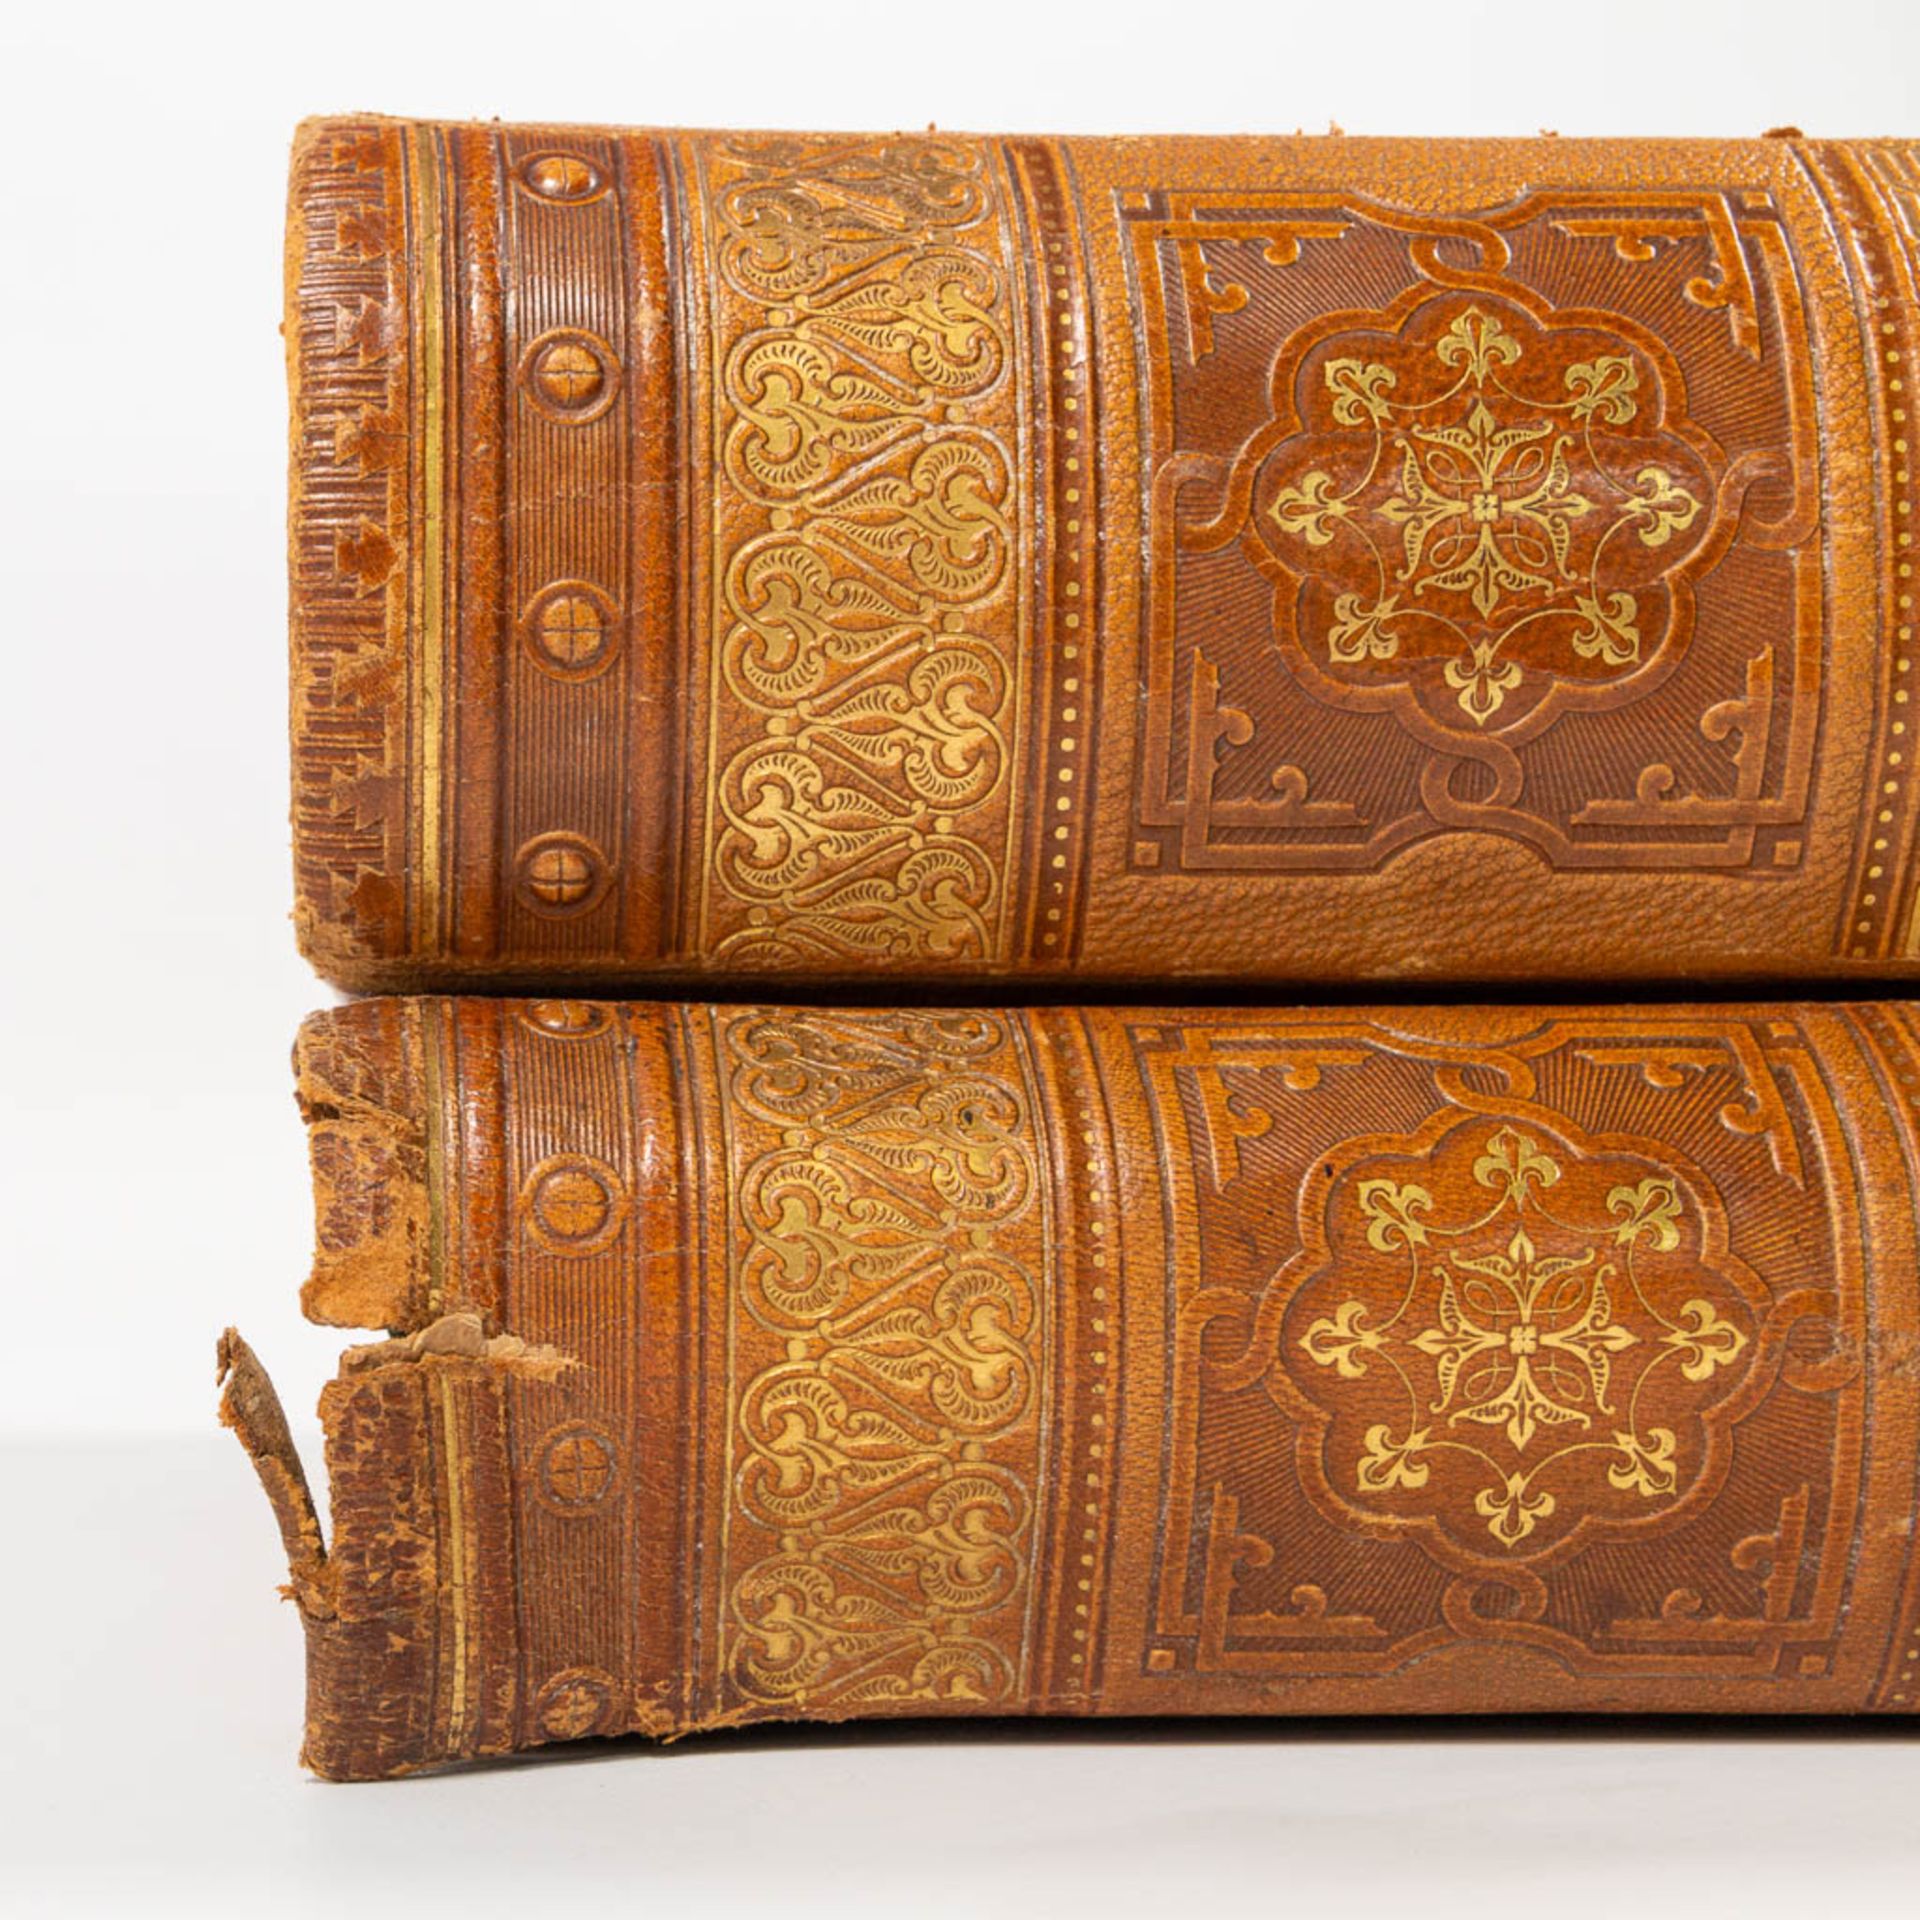 A pair of bibles 'The holy writing', the old and new testament, with 200 images by Gustave Doré. - Image 7 of 15